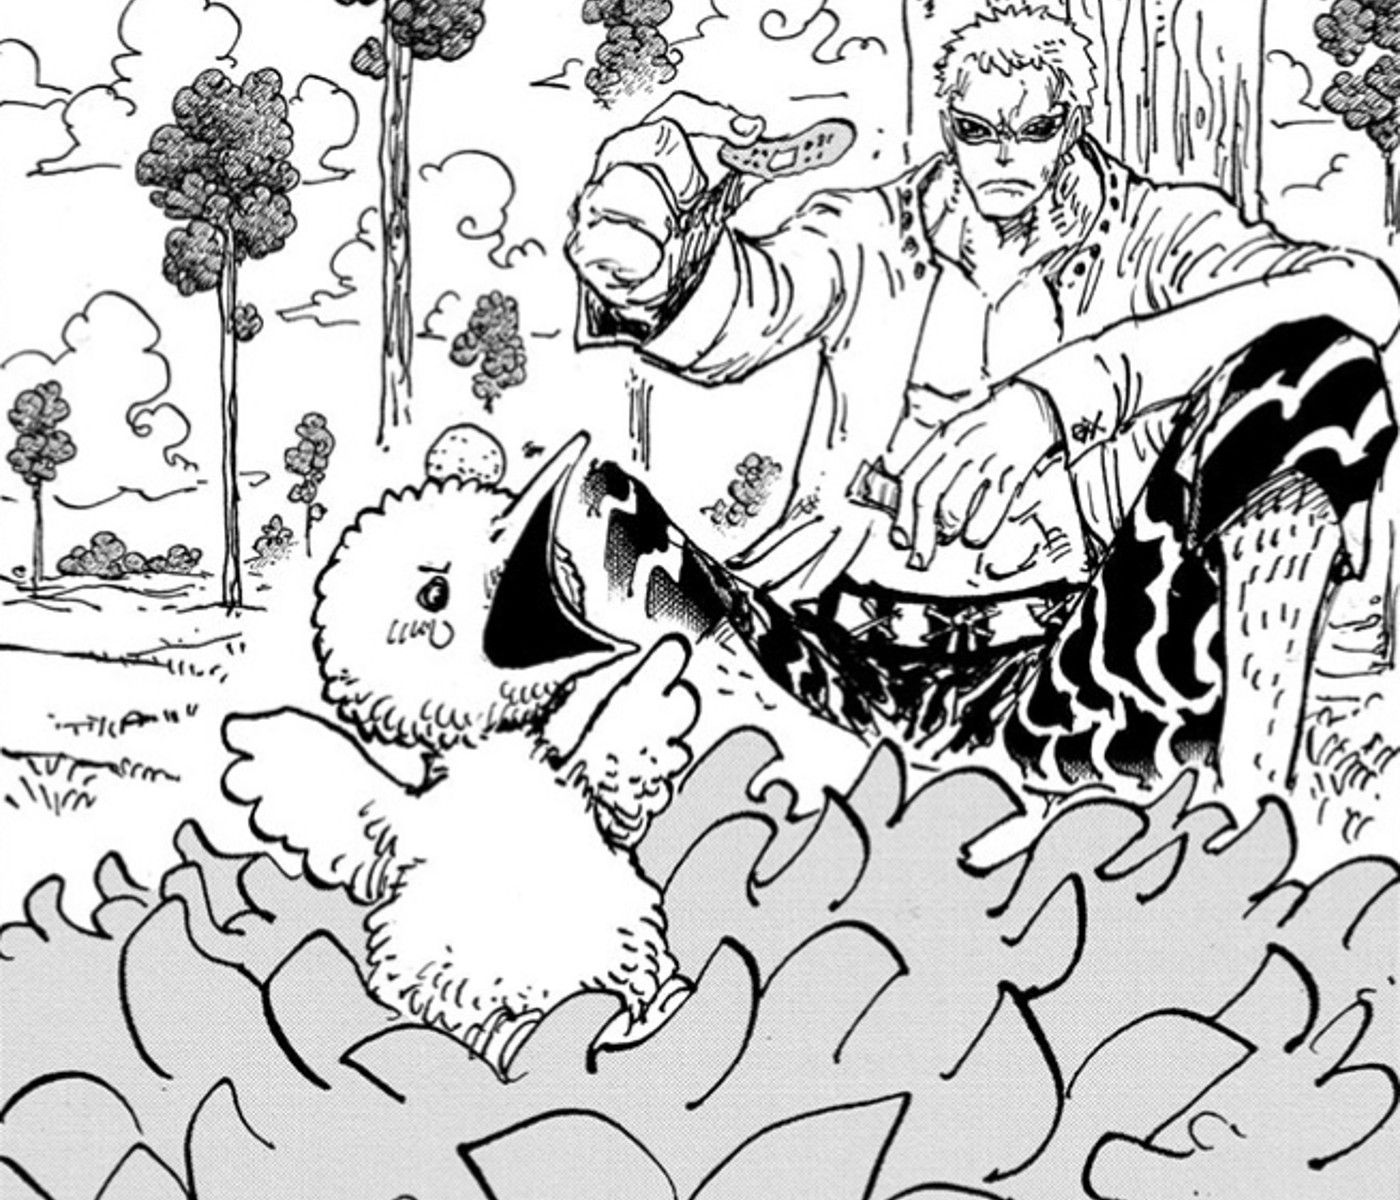 One Piece Just Revealed The Human Side of its Most Despicable Villain